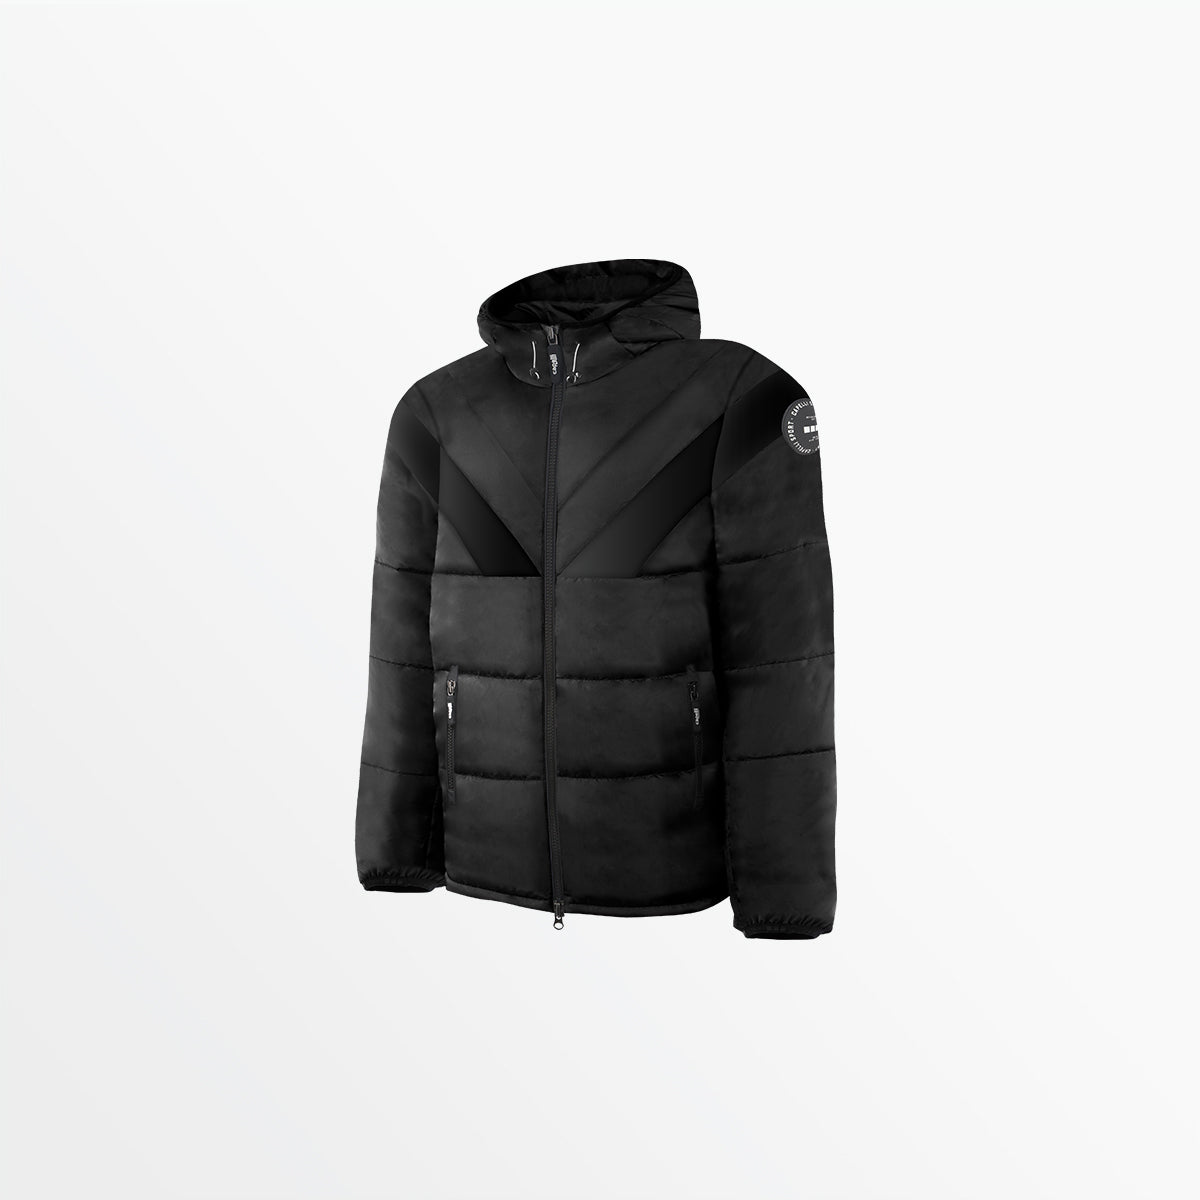 YOUTH COLOR BLOCKED WINTER JACKET